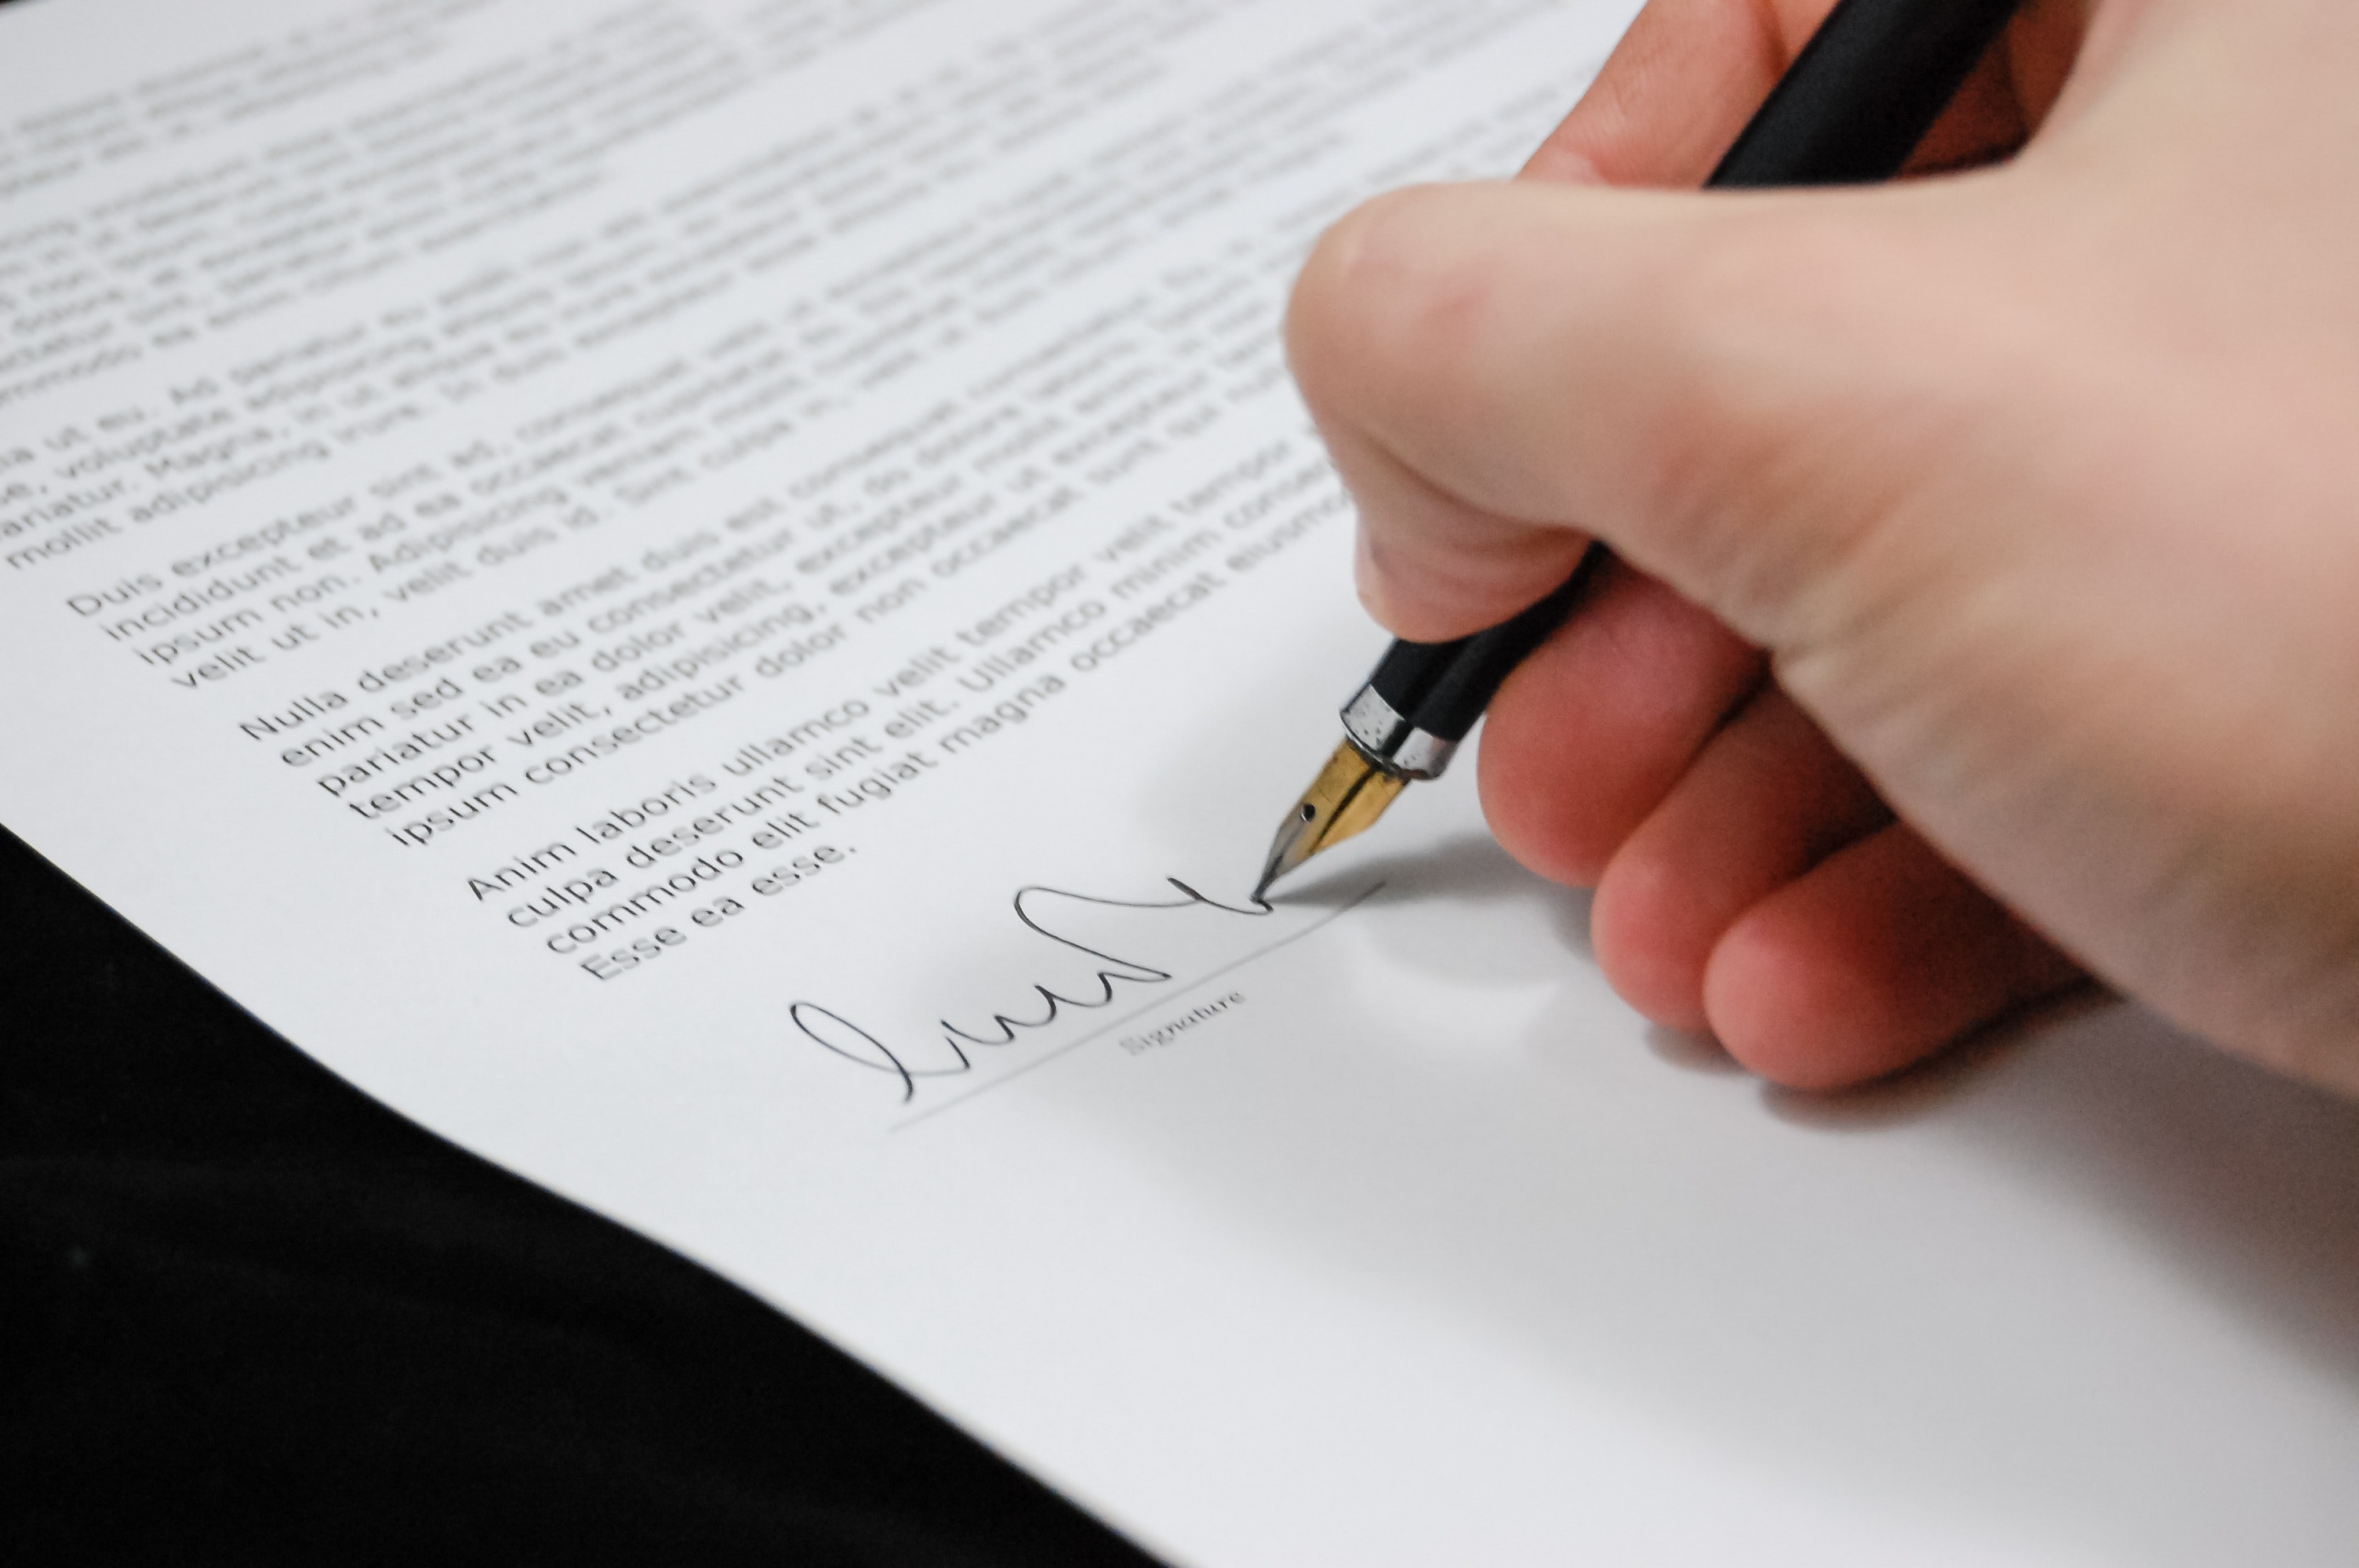 Hand holding pen, signing at the bottom of a document